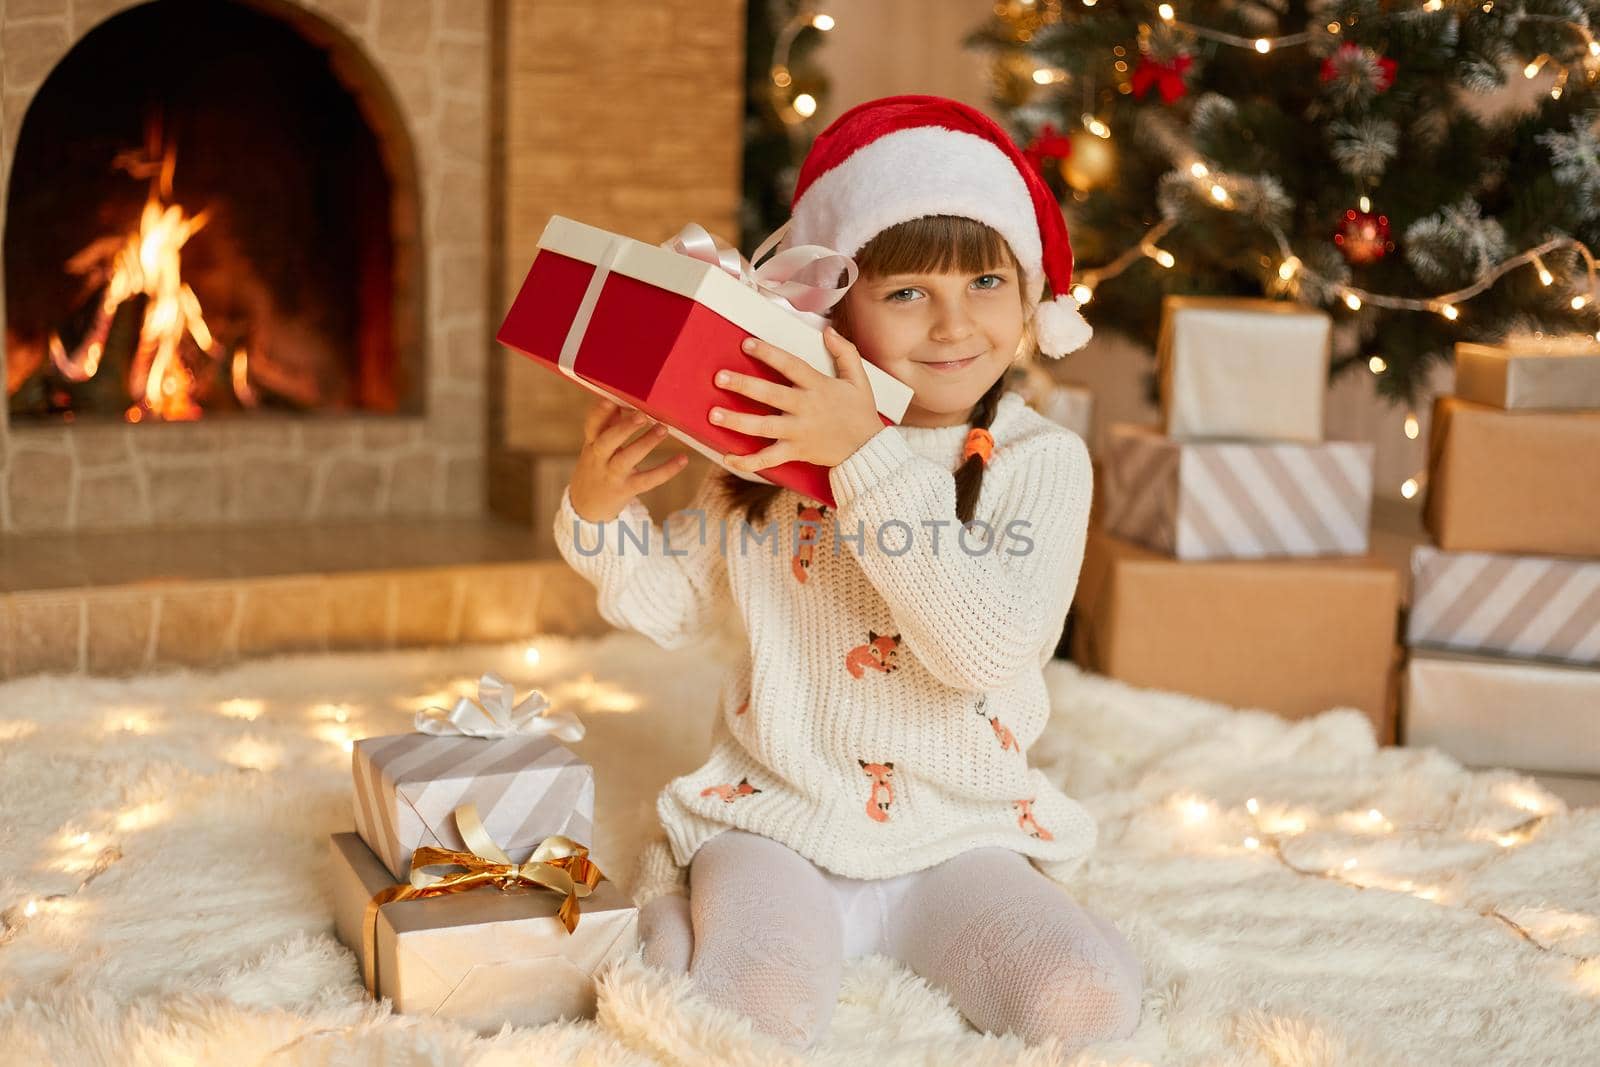 Female child in red hat and warm white jumper sitting on floor in living room with Christmas decoration, shaking gift box , trying to guess what is inside, looks smiling at camera.